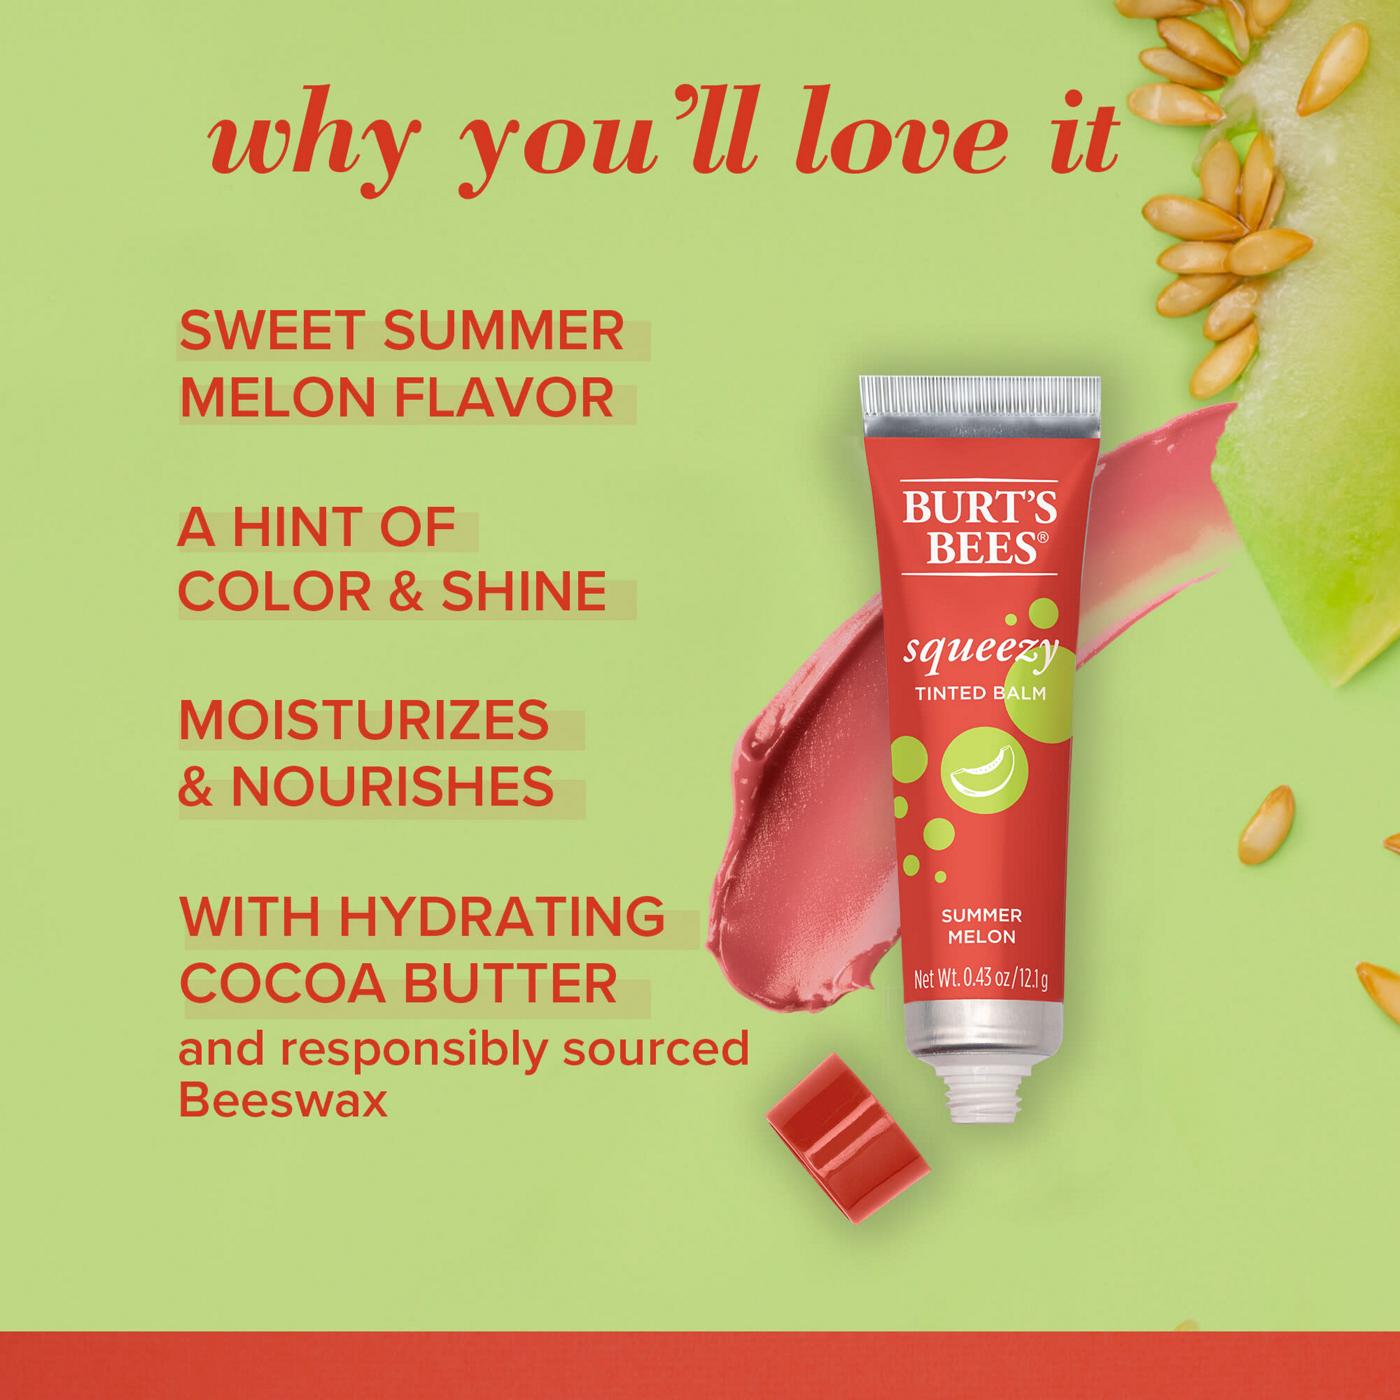 Burt's Bees Squeezy Tinted Balm - Summer Melon; image 3 of 10